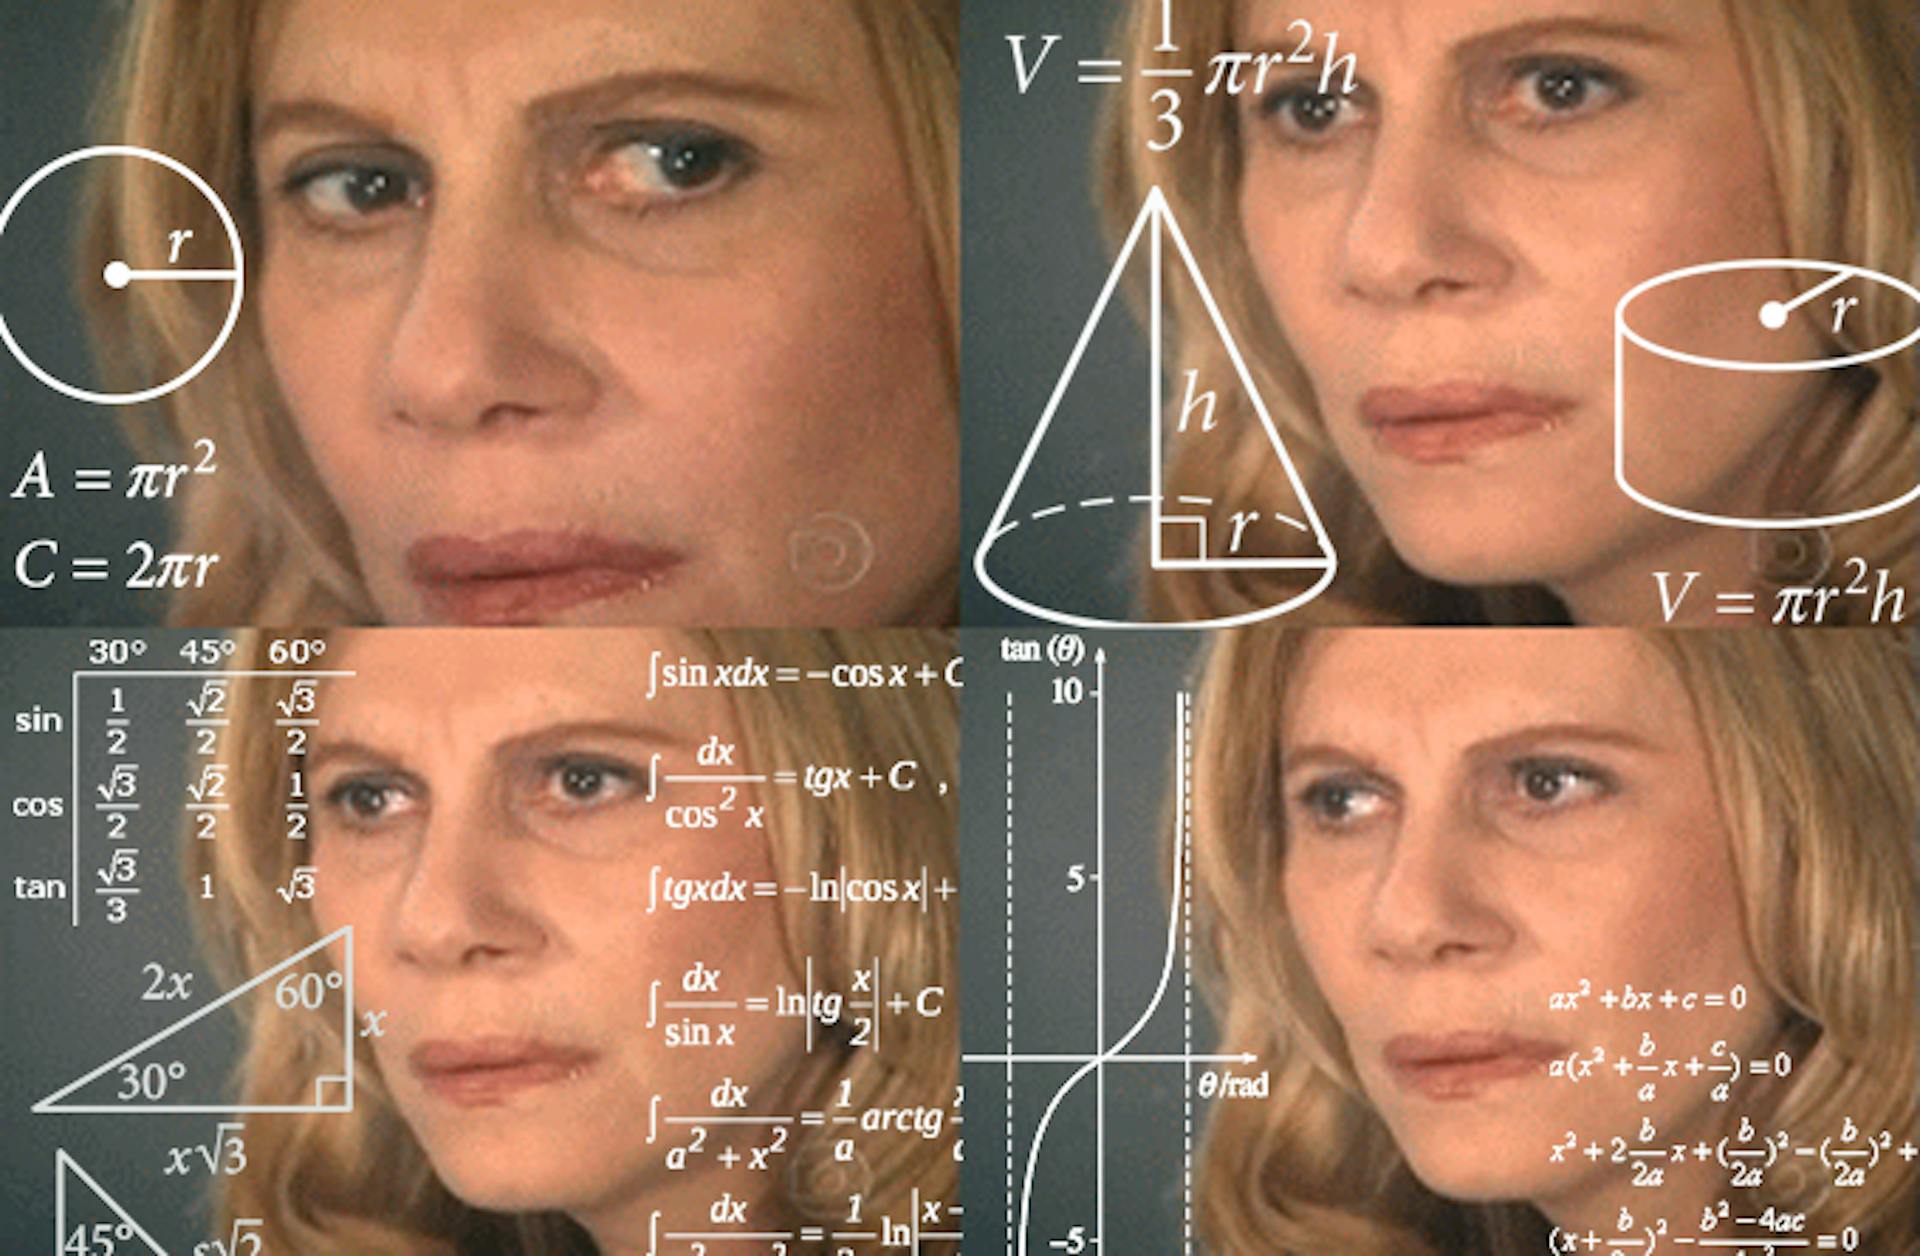 Confused Lady Meme - Me trying to figure out CPython's source code. Source https://knowyourmeme.com/memes/math-lady-confused-lady